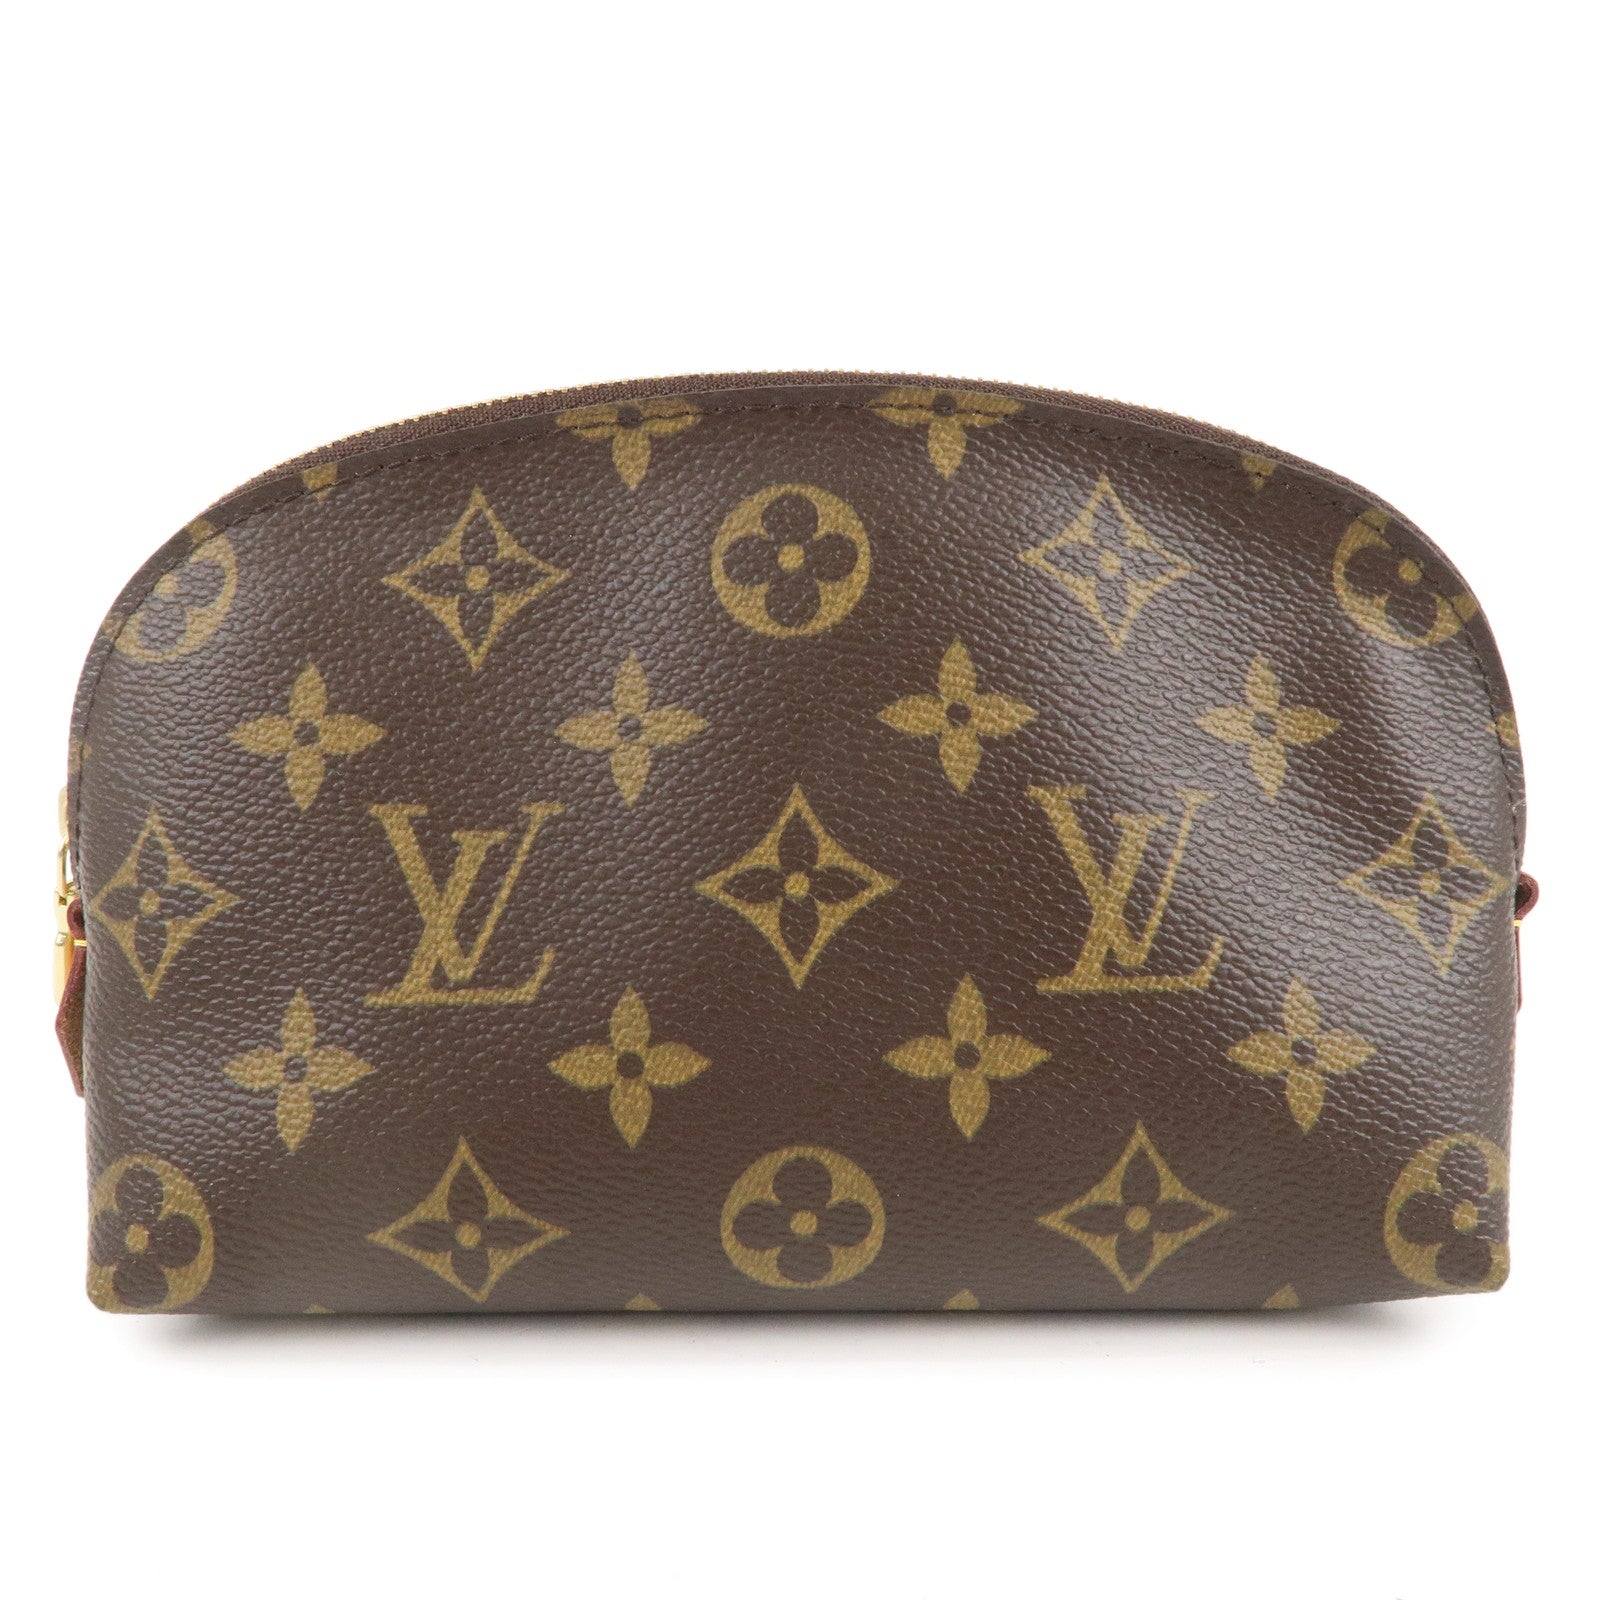 This Vanity case from the luxury brand Louis Vuitton is